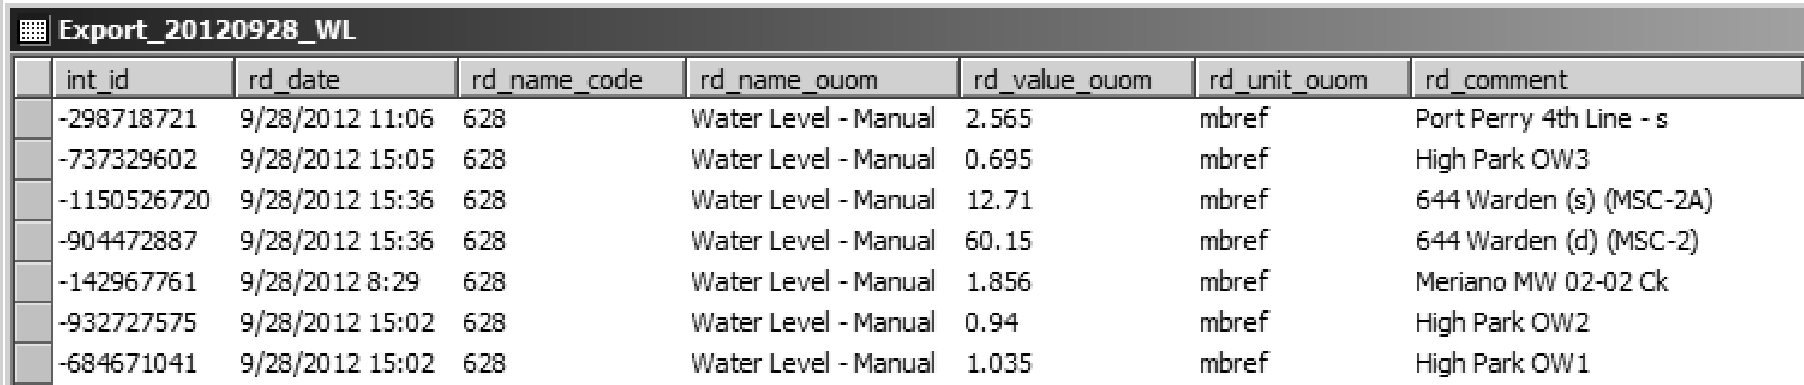 Figure 2.3.5.2 Manual Water Levels - import format